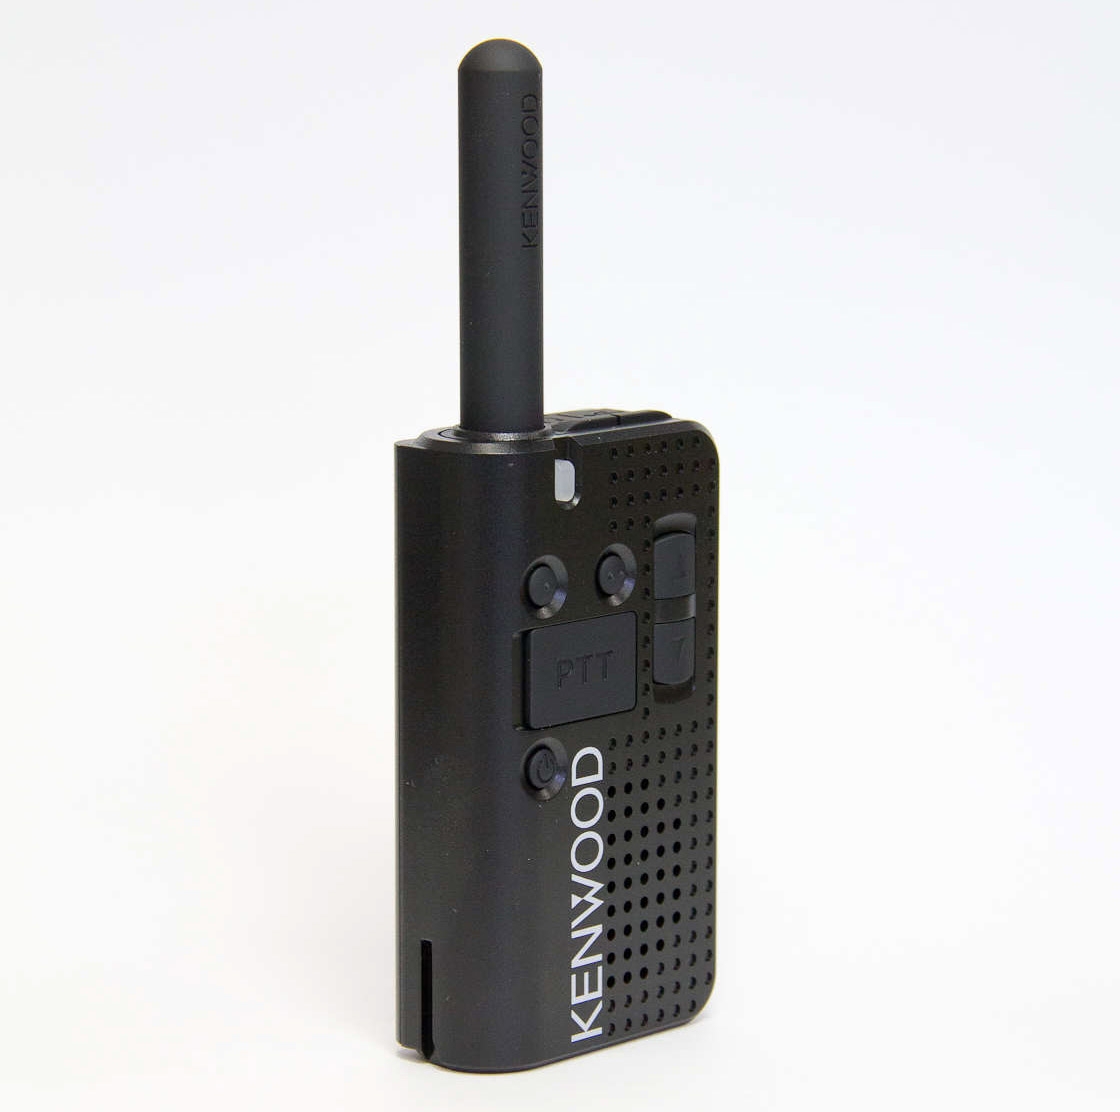 Entry-Level Two Way Radios & Accessories